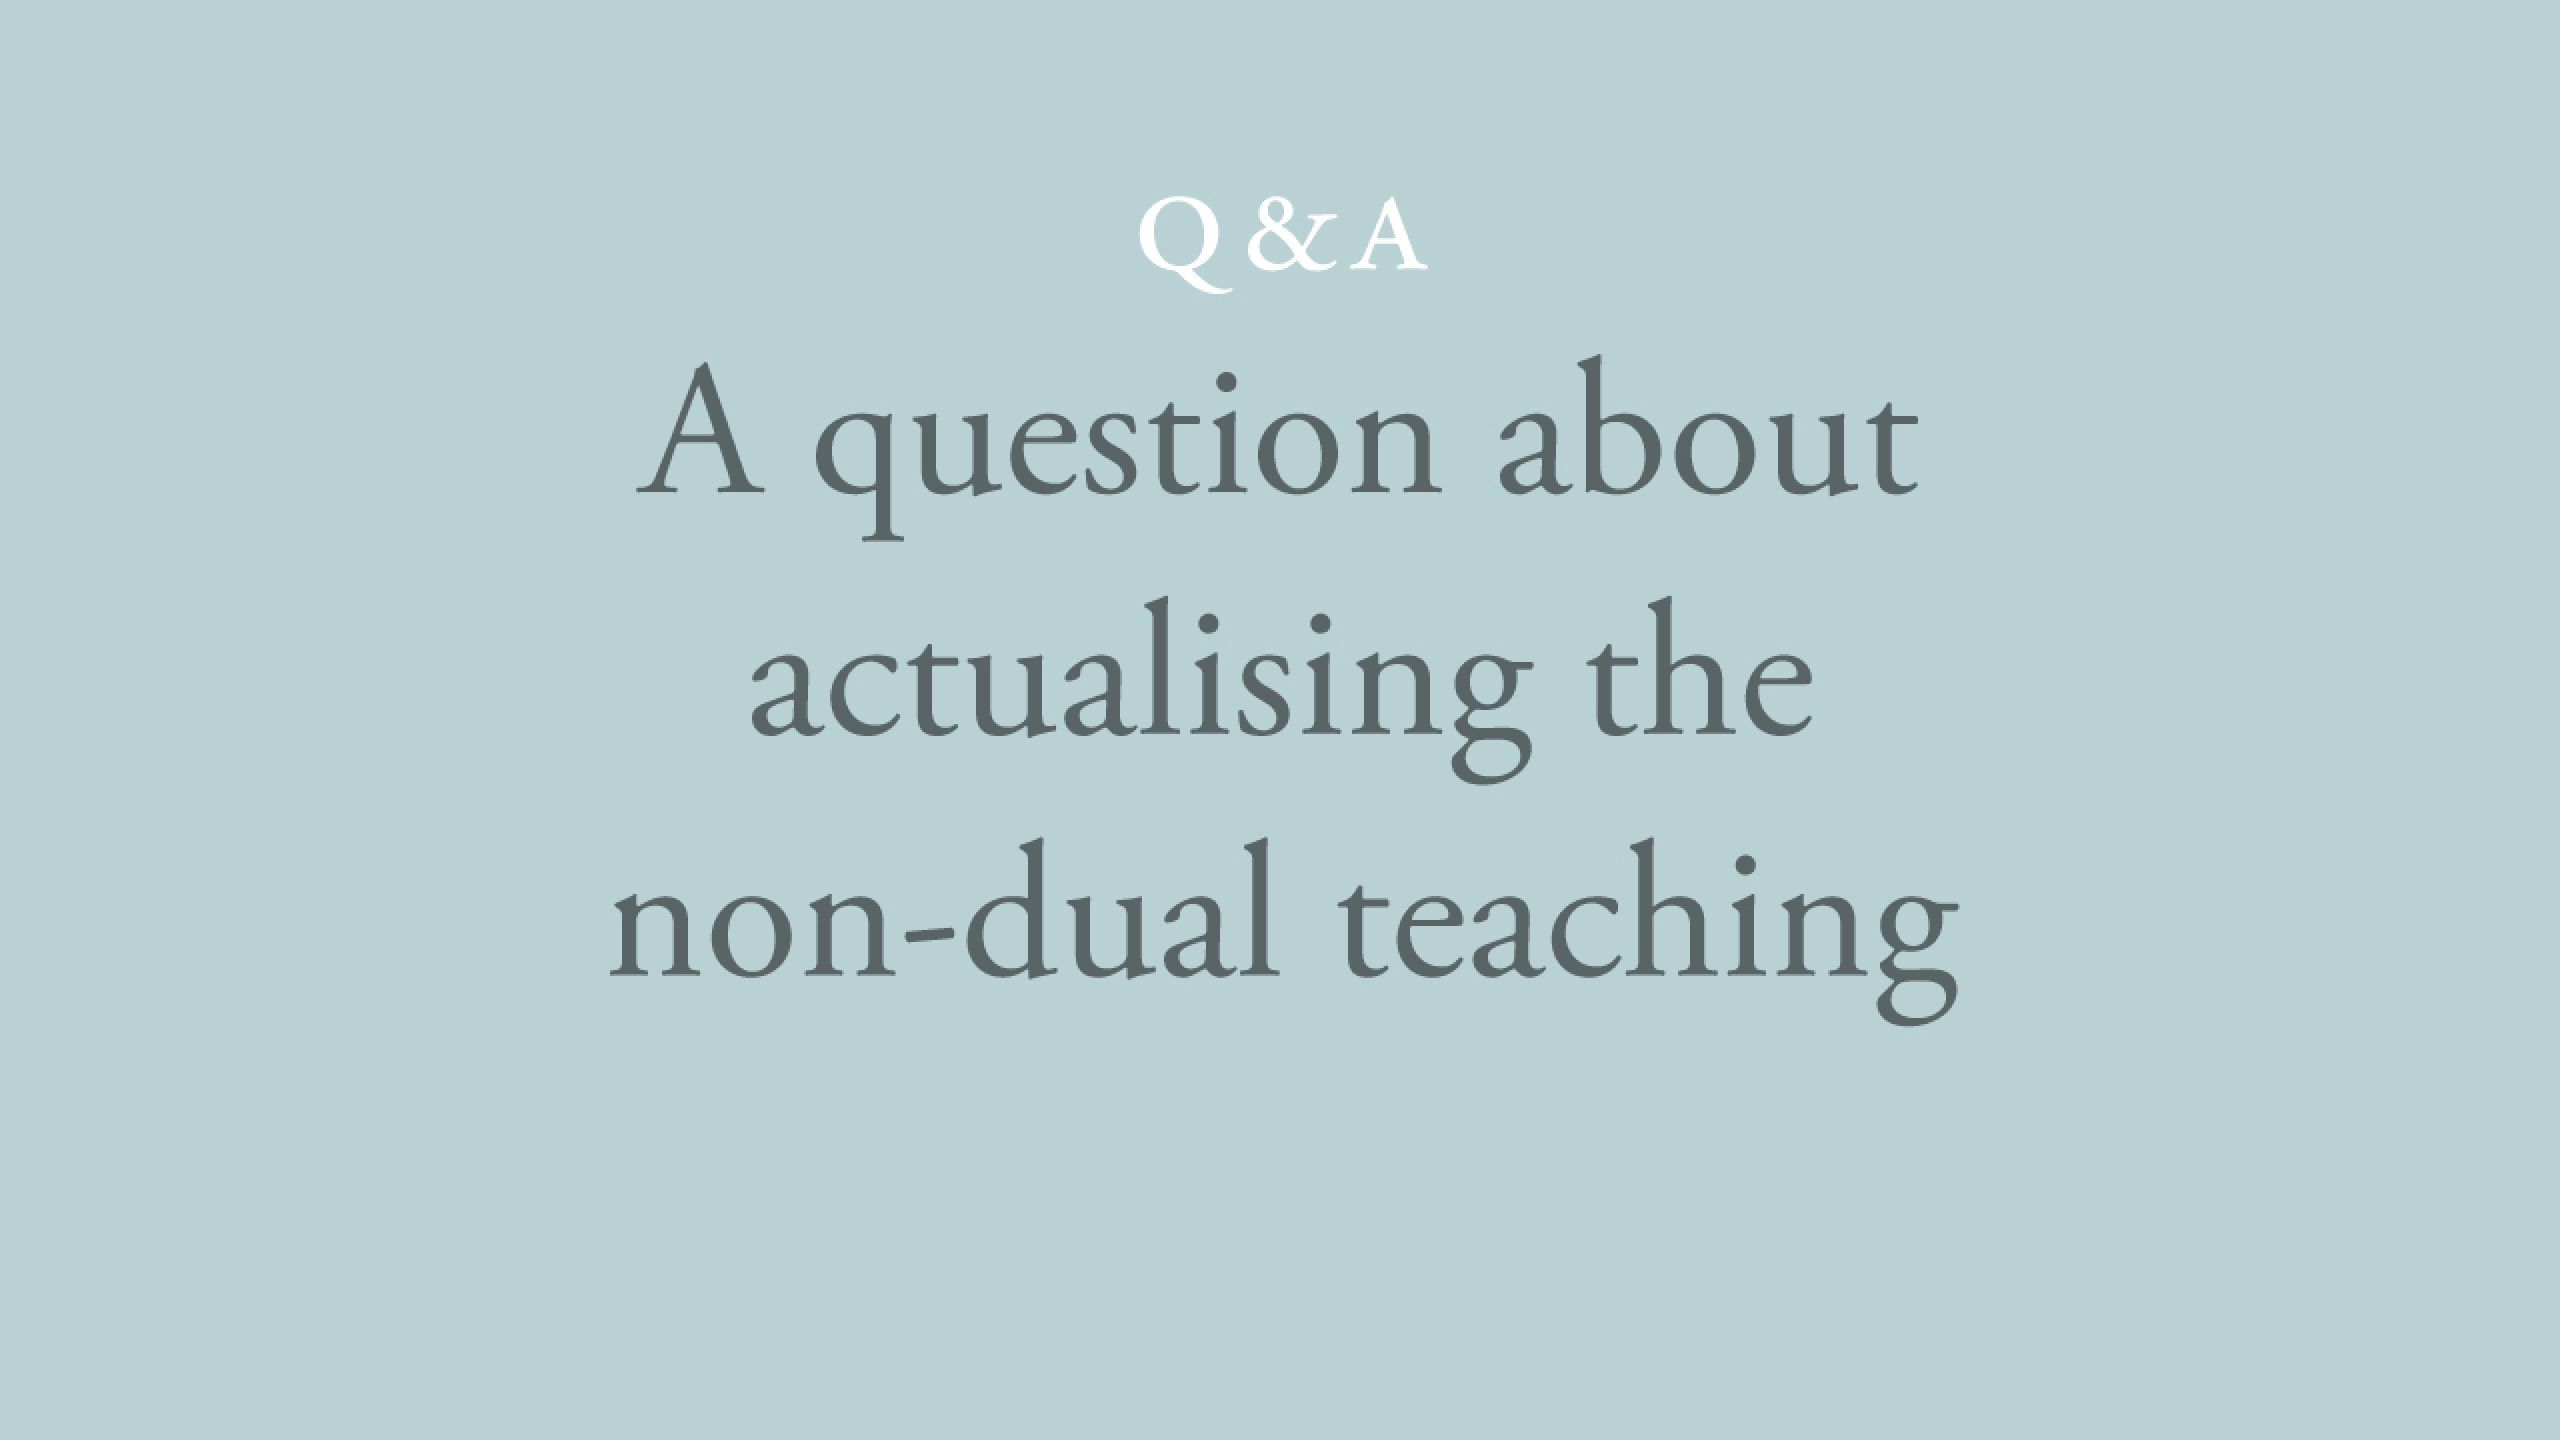 What is the relationship between understanding and actualising the non-dual teaching?